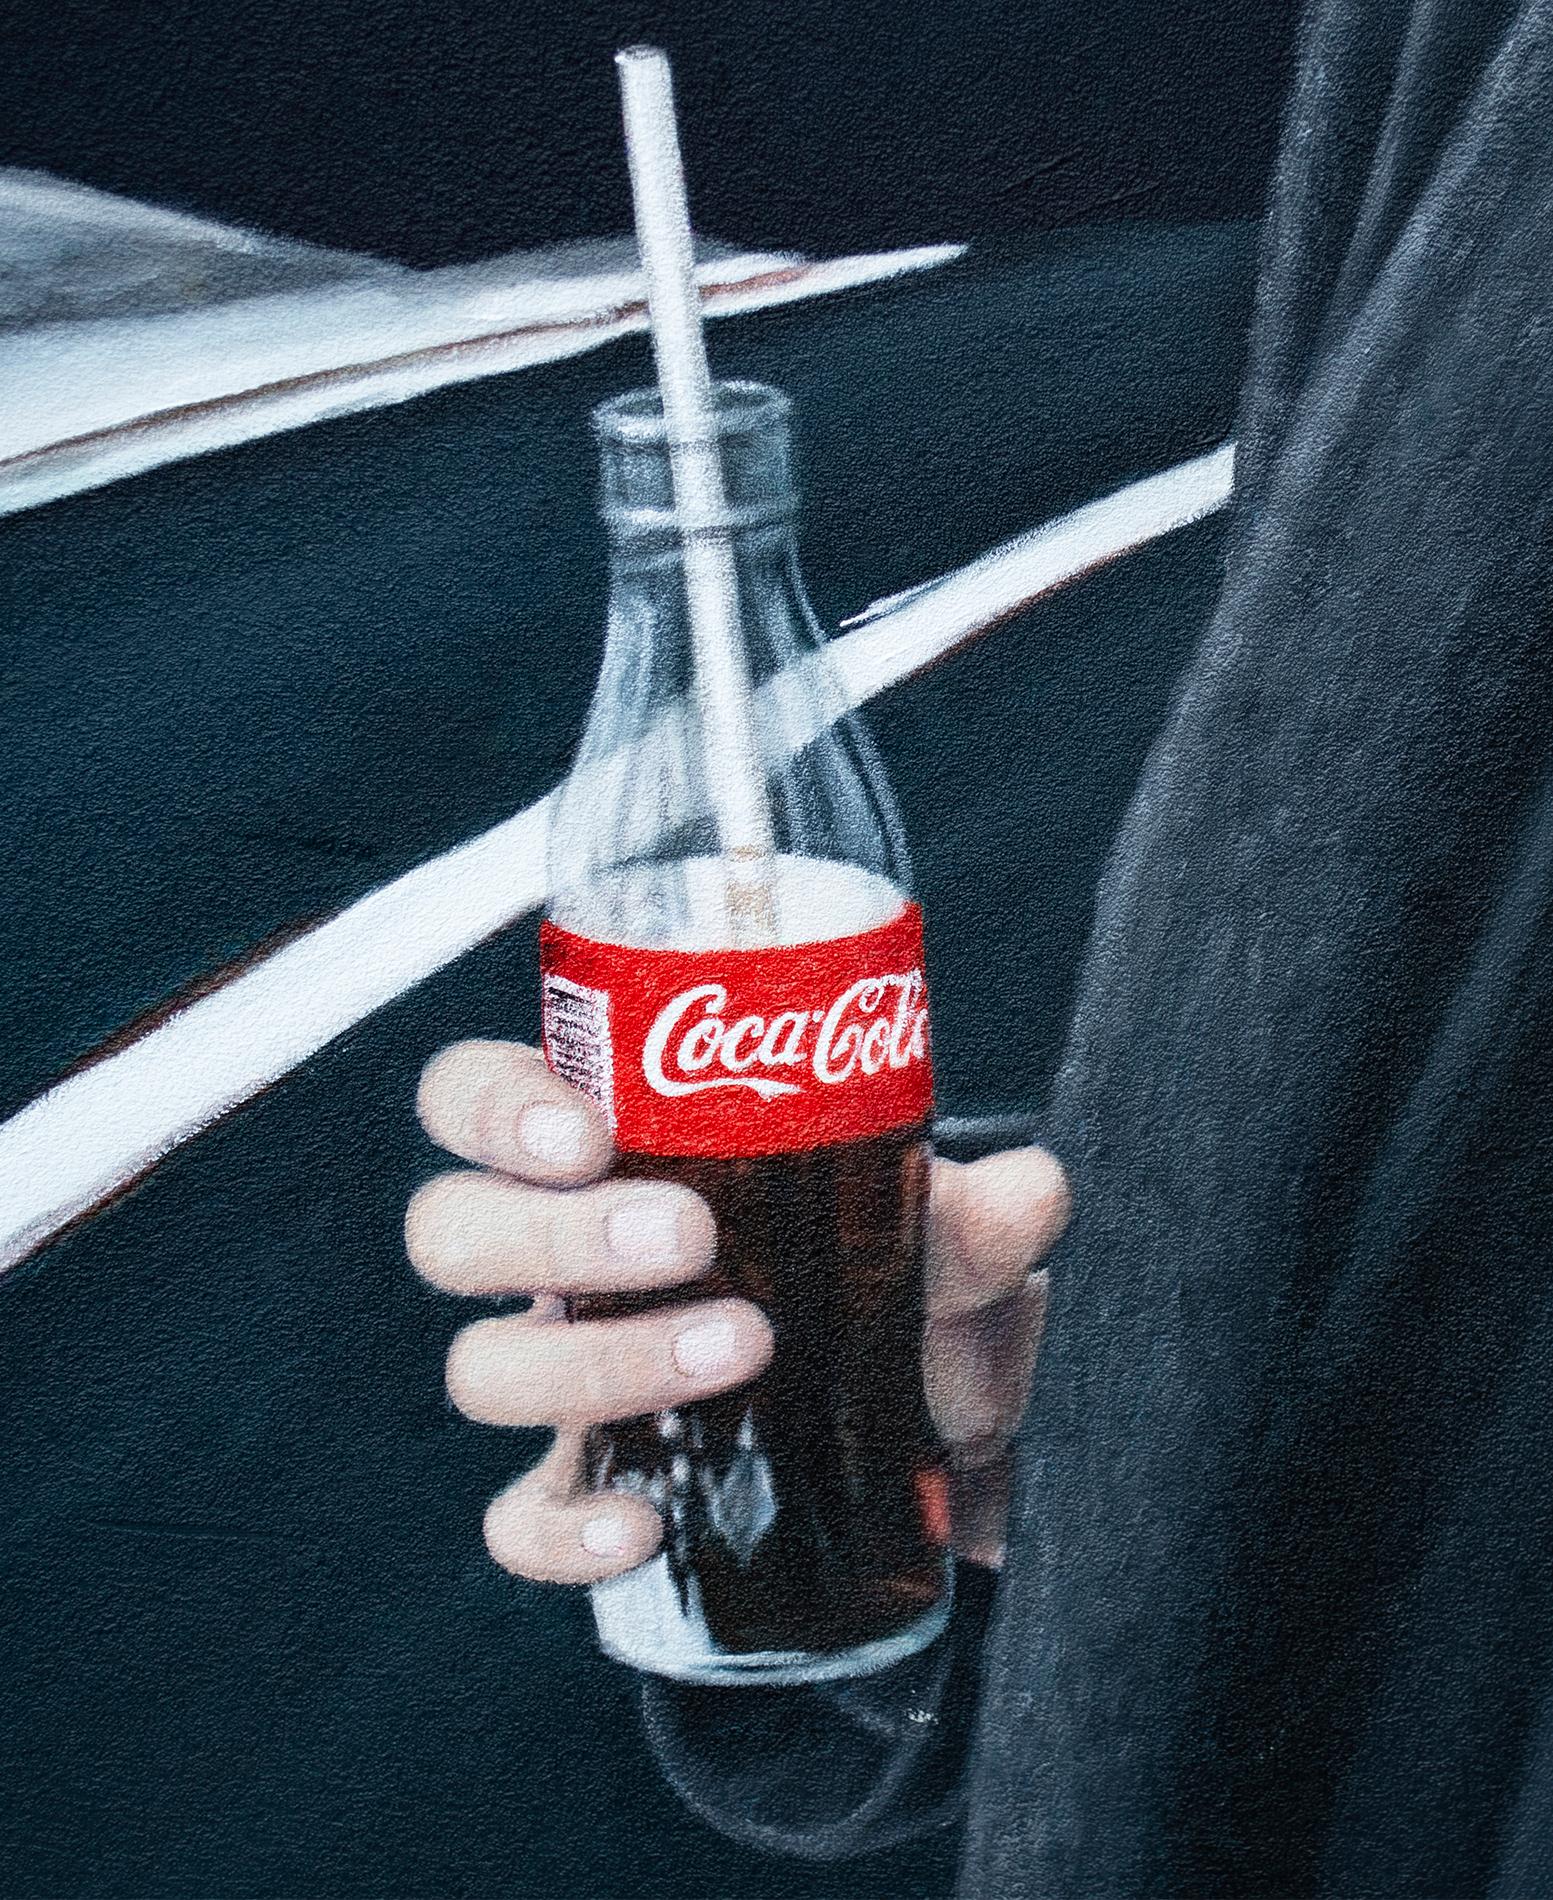 The memory of the festive Coca-Cola commercial came to mind, where a truck adorned with holiday lights rushes along the night road.
There's no festive truck...
Only the night and the road...
For texture on the primed canvas before painting, a layer